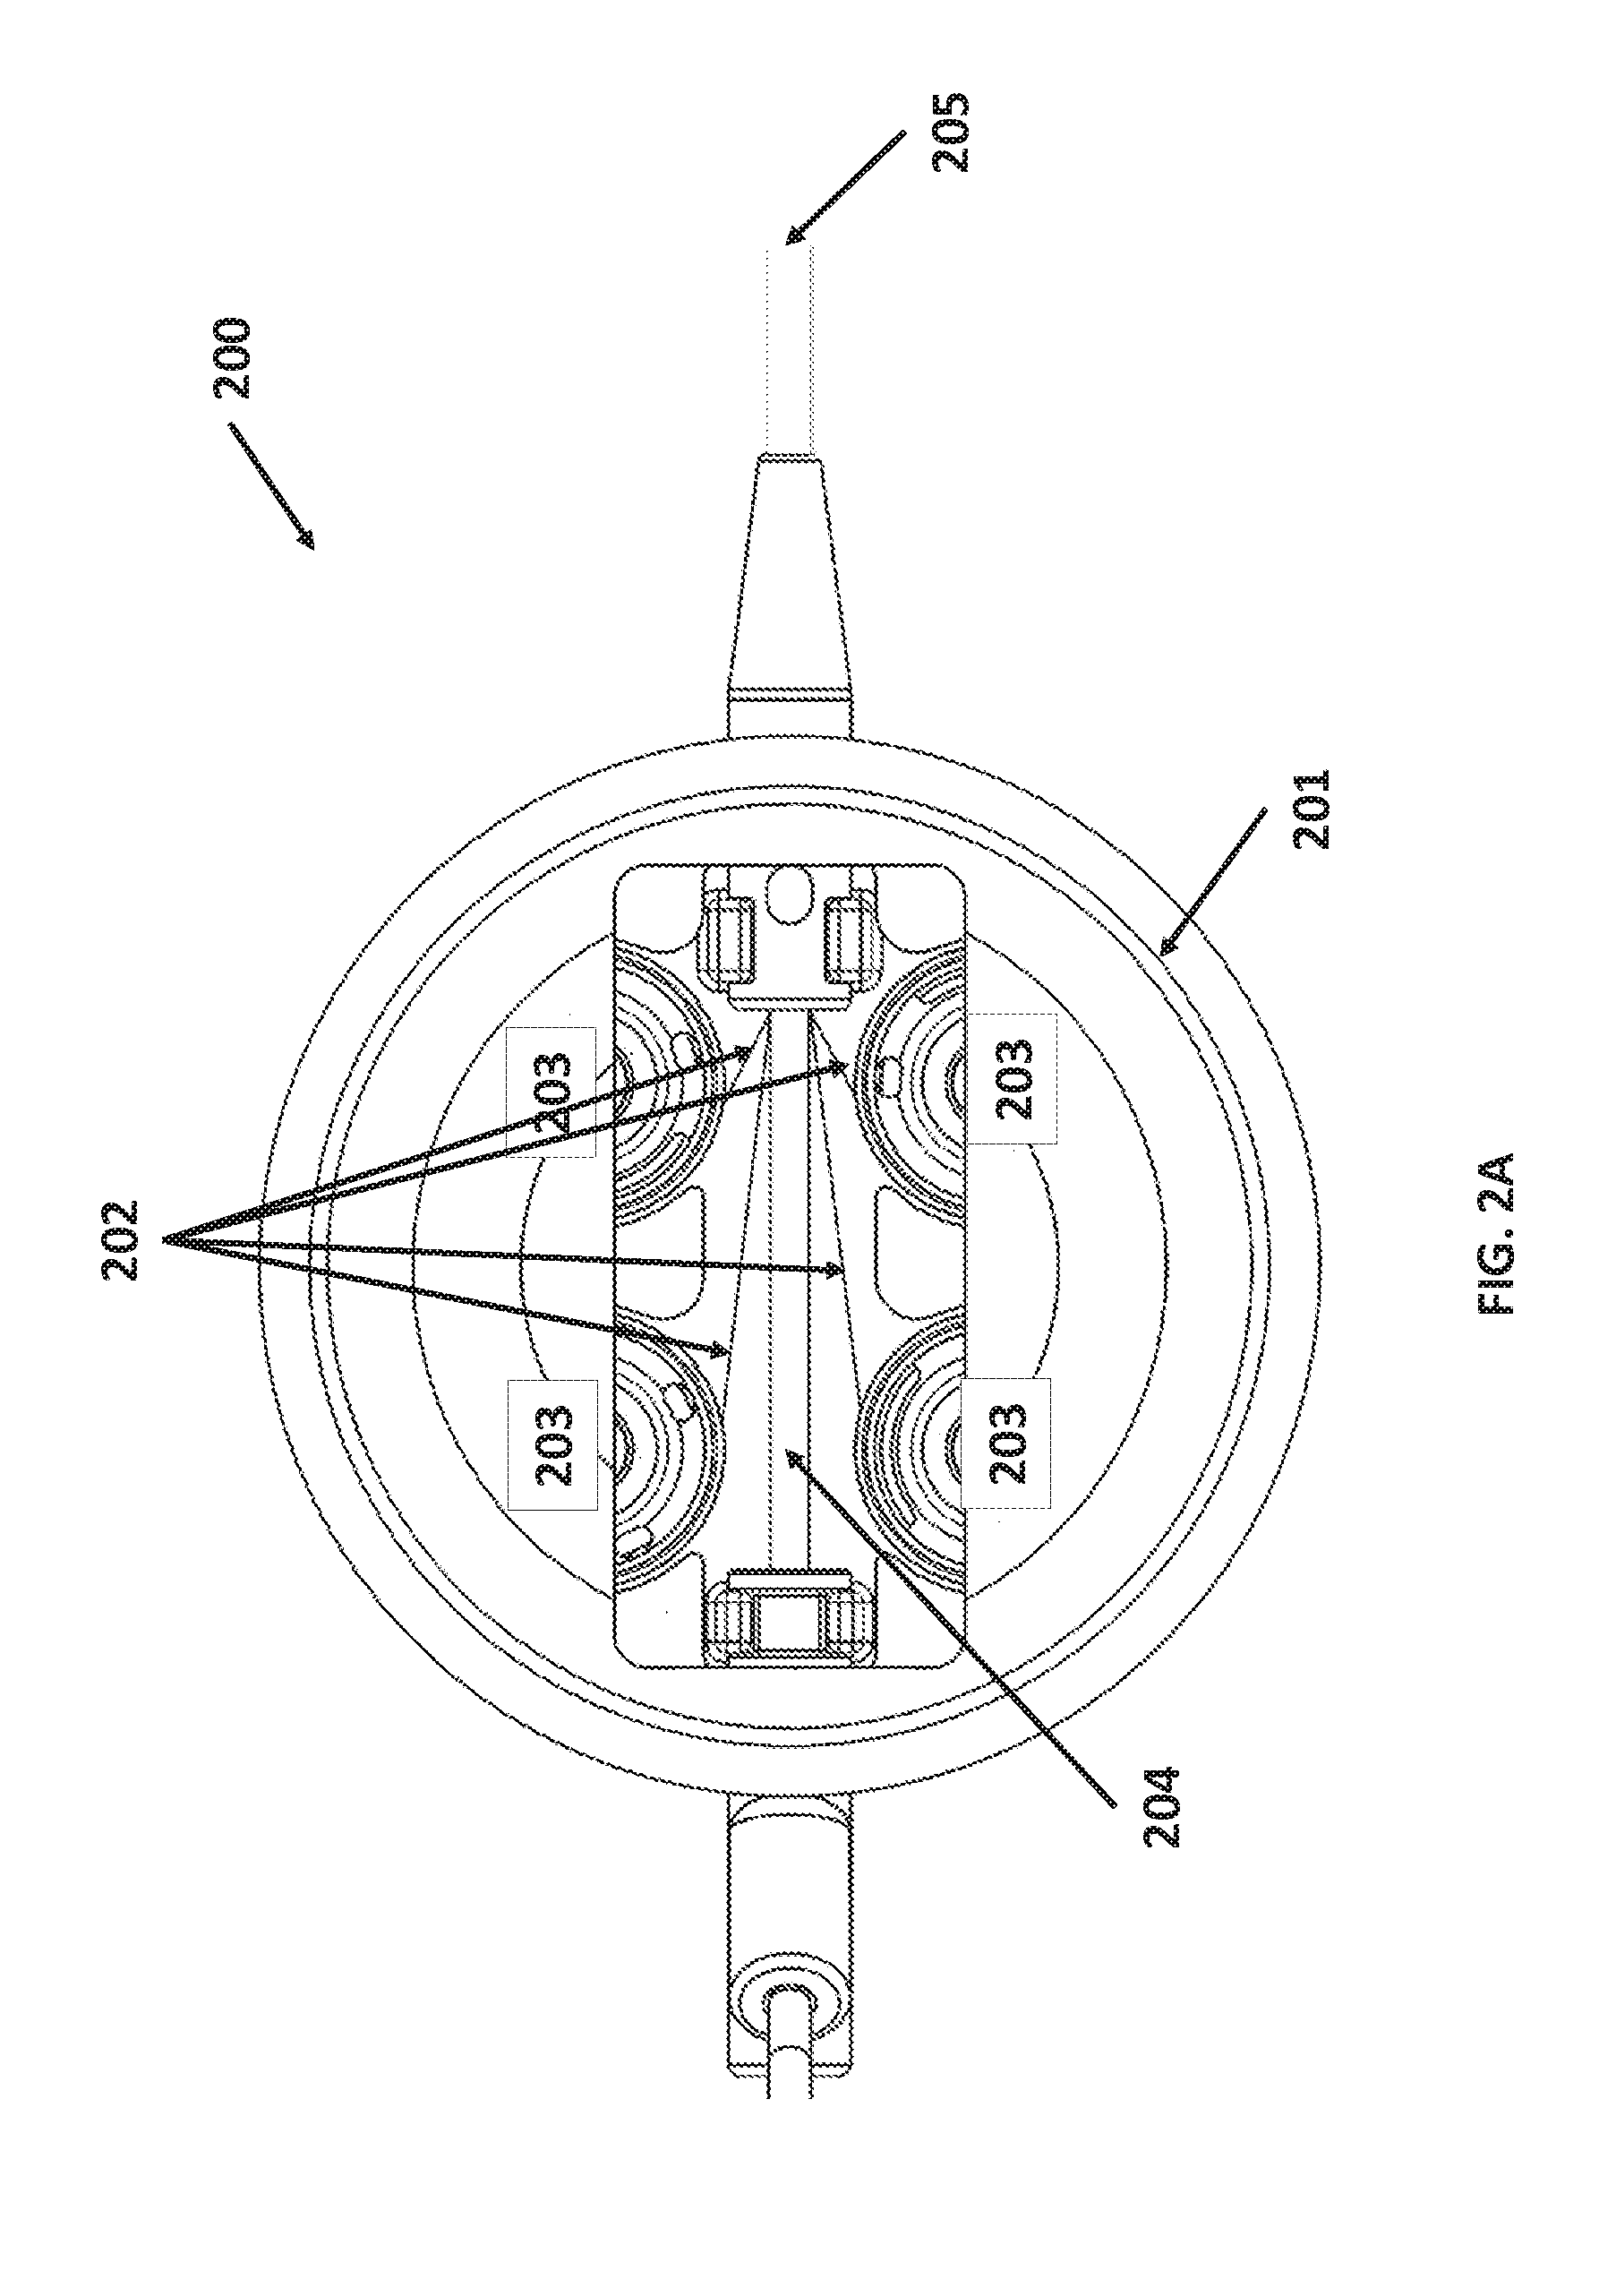 Articulating flexible endoscopic tool with roll capabilities